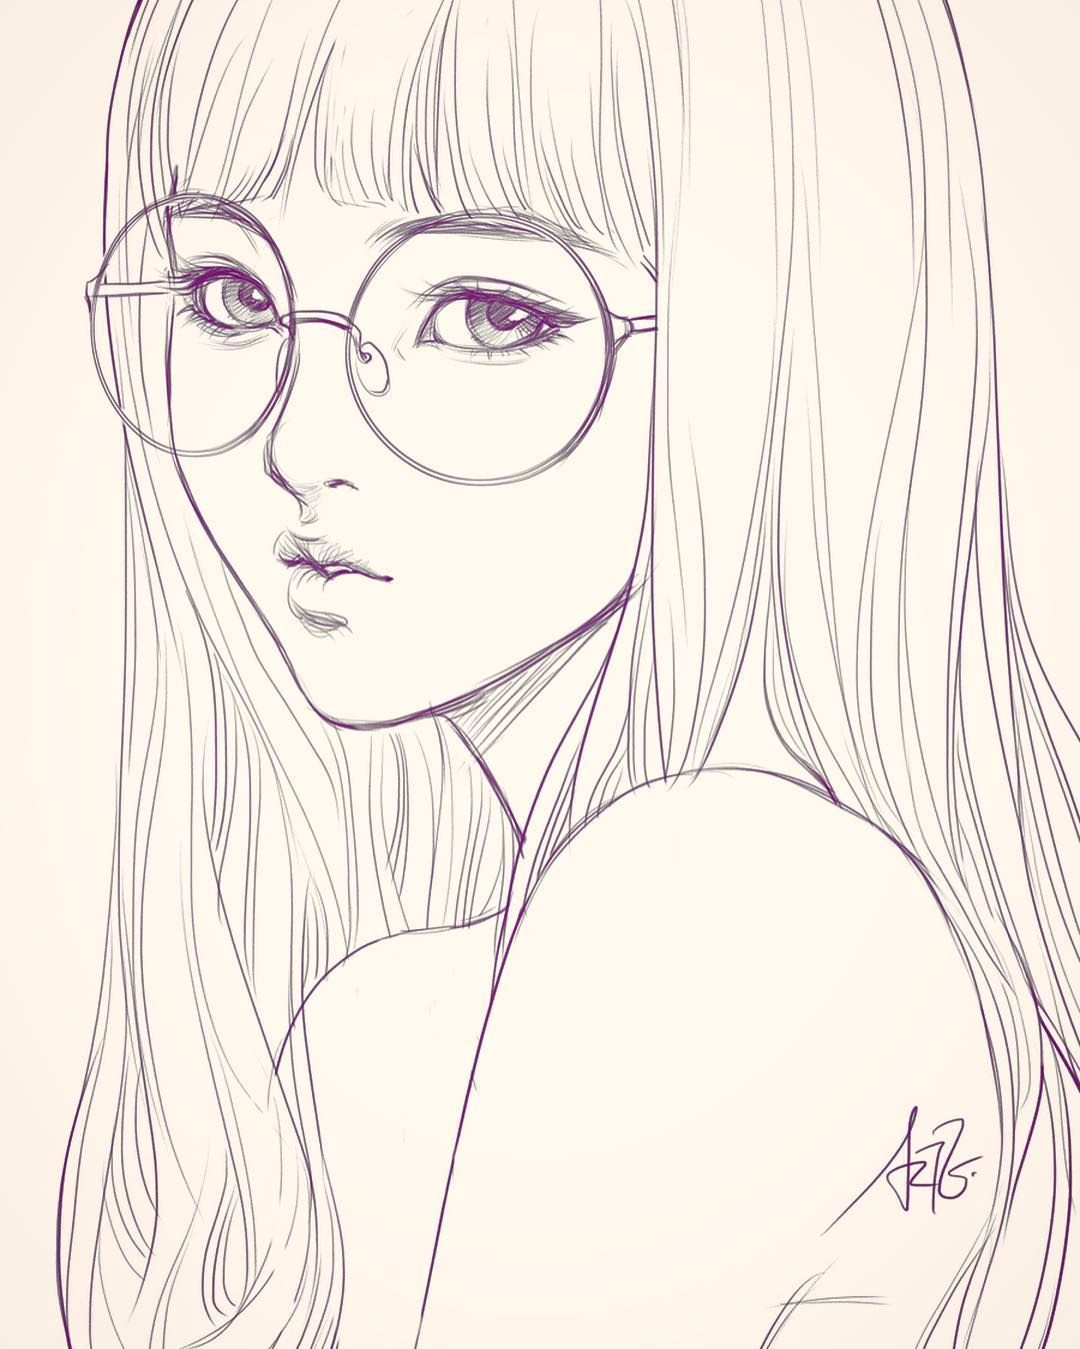 Drawing Girl with Bangs Last Sketch Of Girl with Glasses Having Bad Backache It Hurts